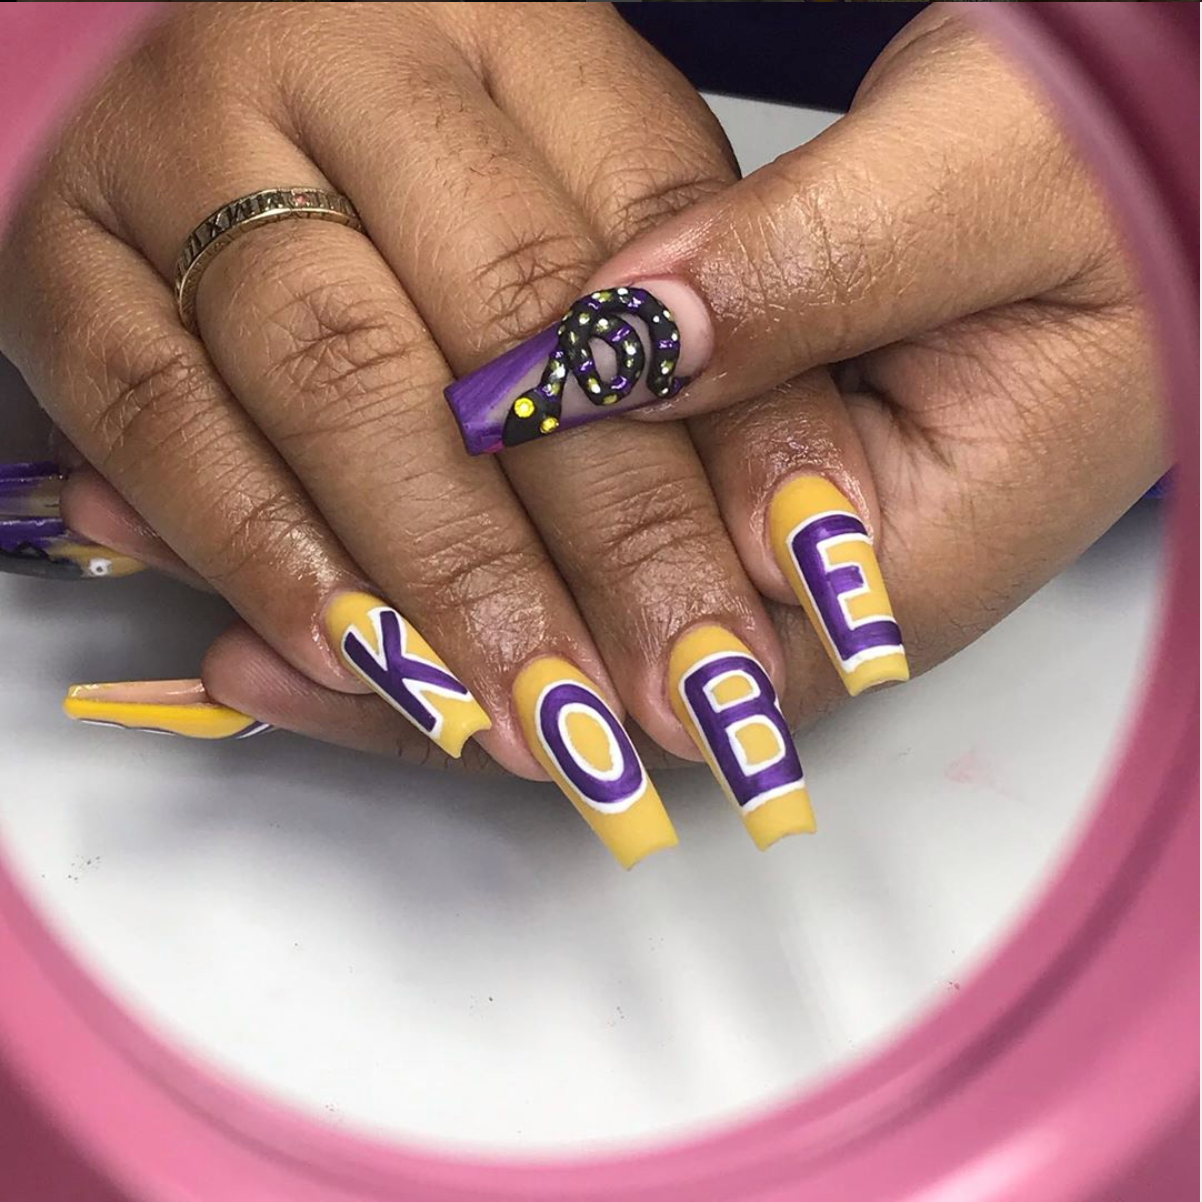 Check Out Beyoncé's Sentimental Nail Art And More Mamba-Inspired Manicures